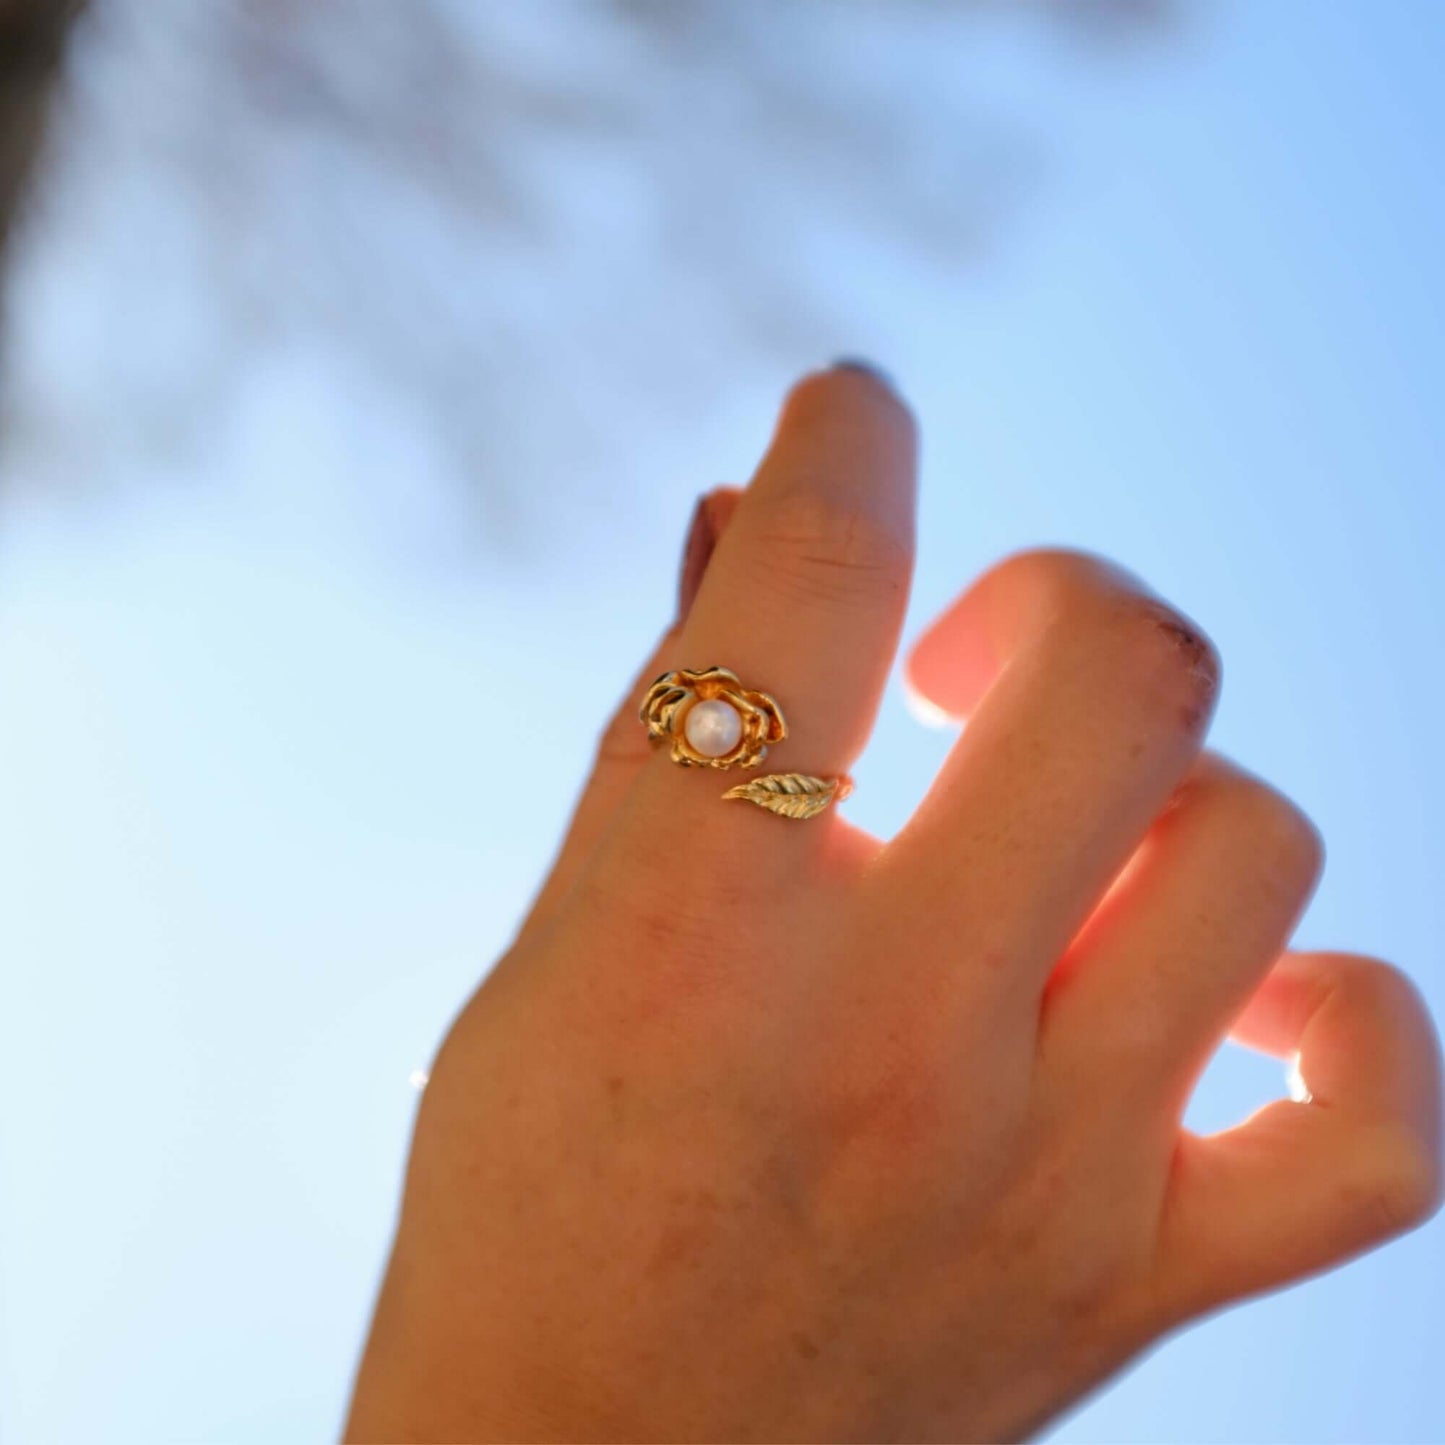 The Little Prince Rose Flower Pearl Open Ring: Floral Leaf Design, Pearl Ring, Pearl Flower Ring,  Leaf Ring, Unique Gift for Her,